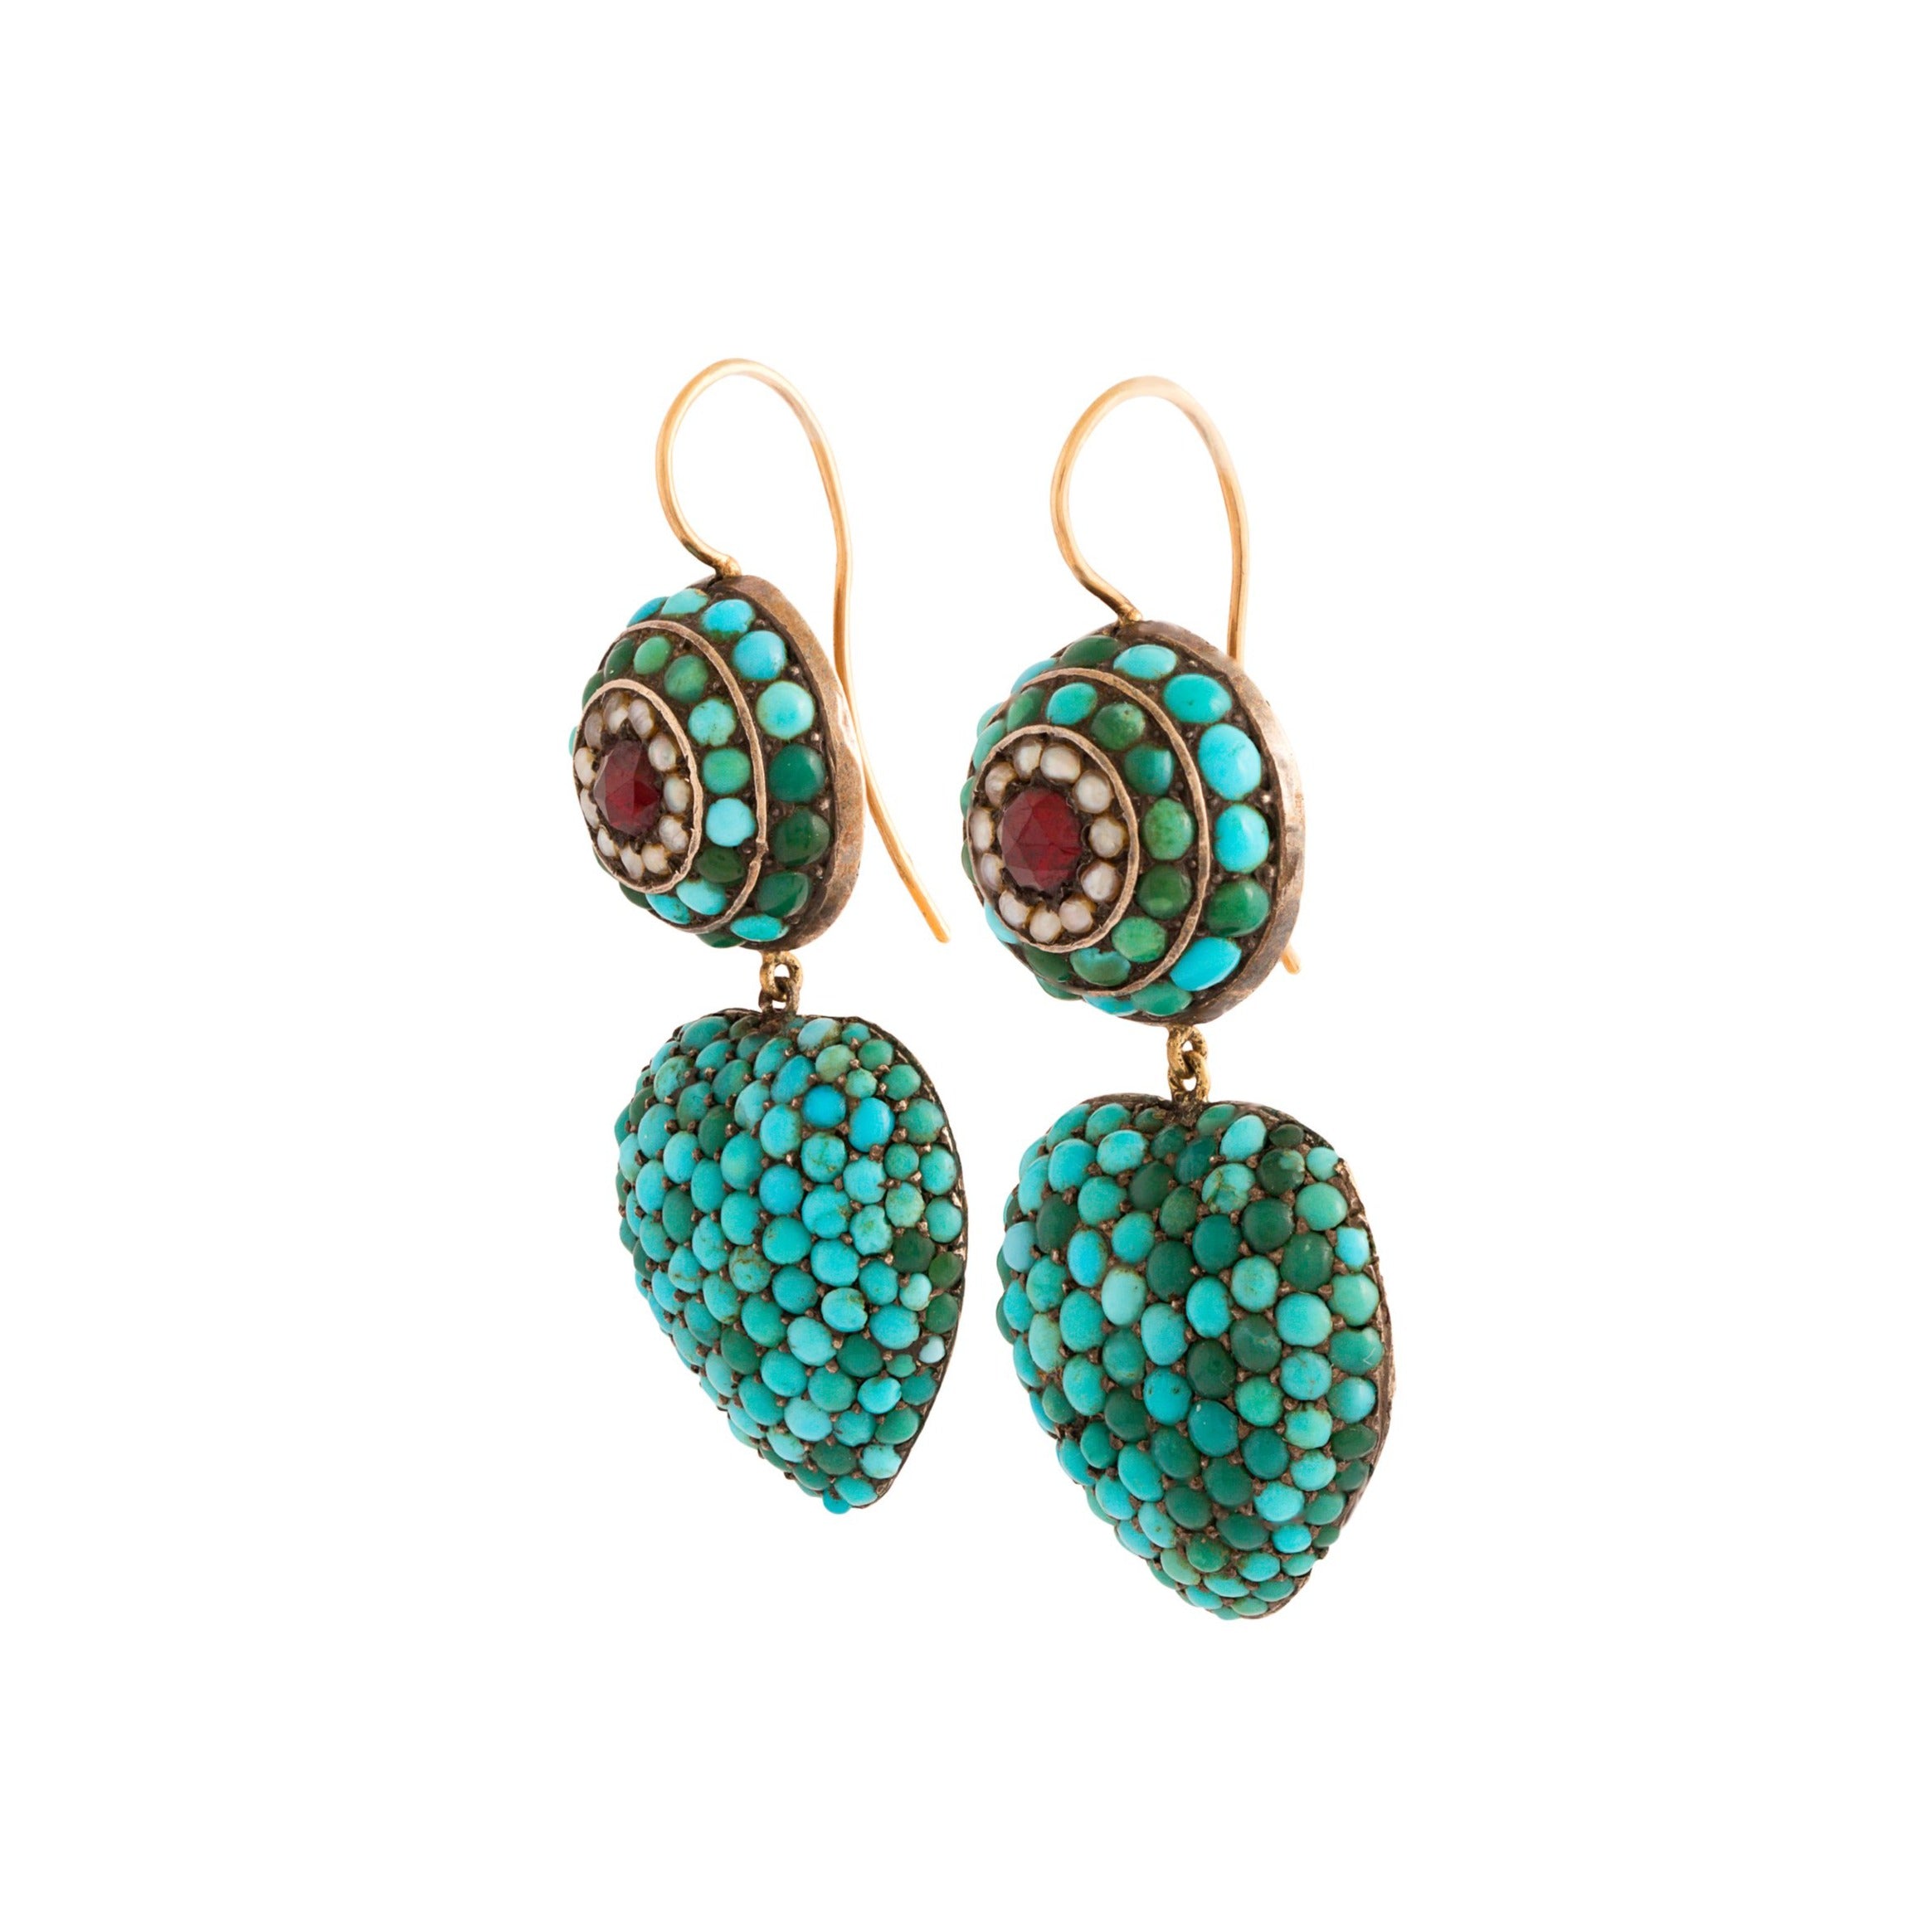 Victorian Pavé Turquoise, Garnet, and Pearl 14K Gold Earrings